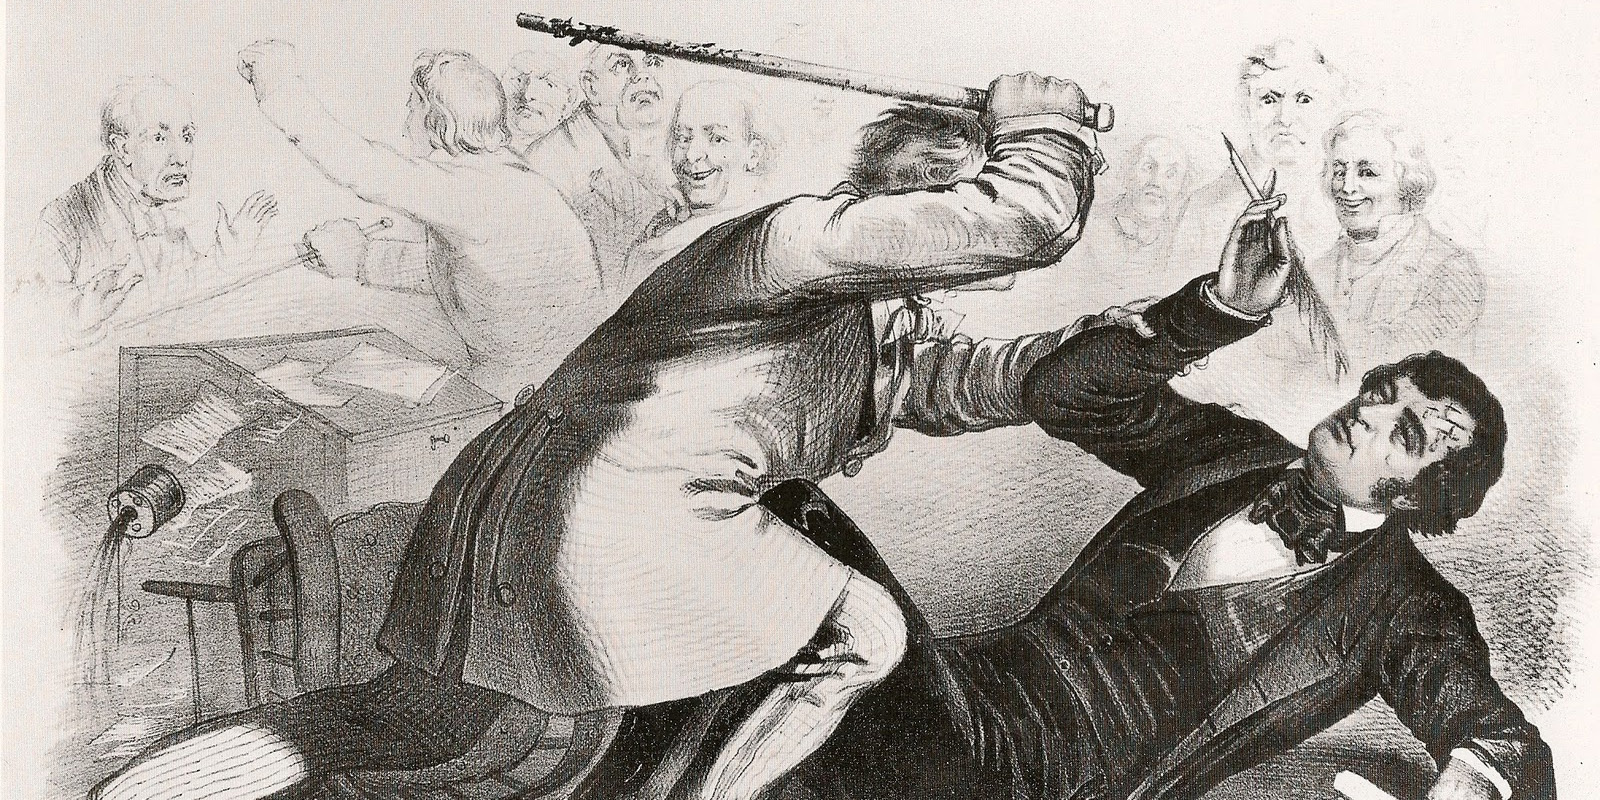 A political cartoon showing one man about to beat another with a cane. The man about to be beaten is holding a quill.